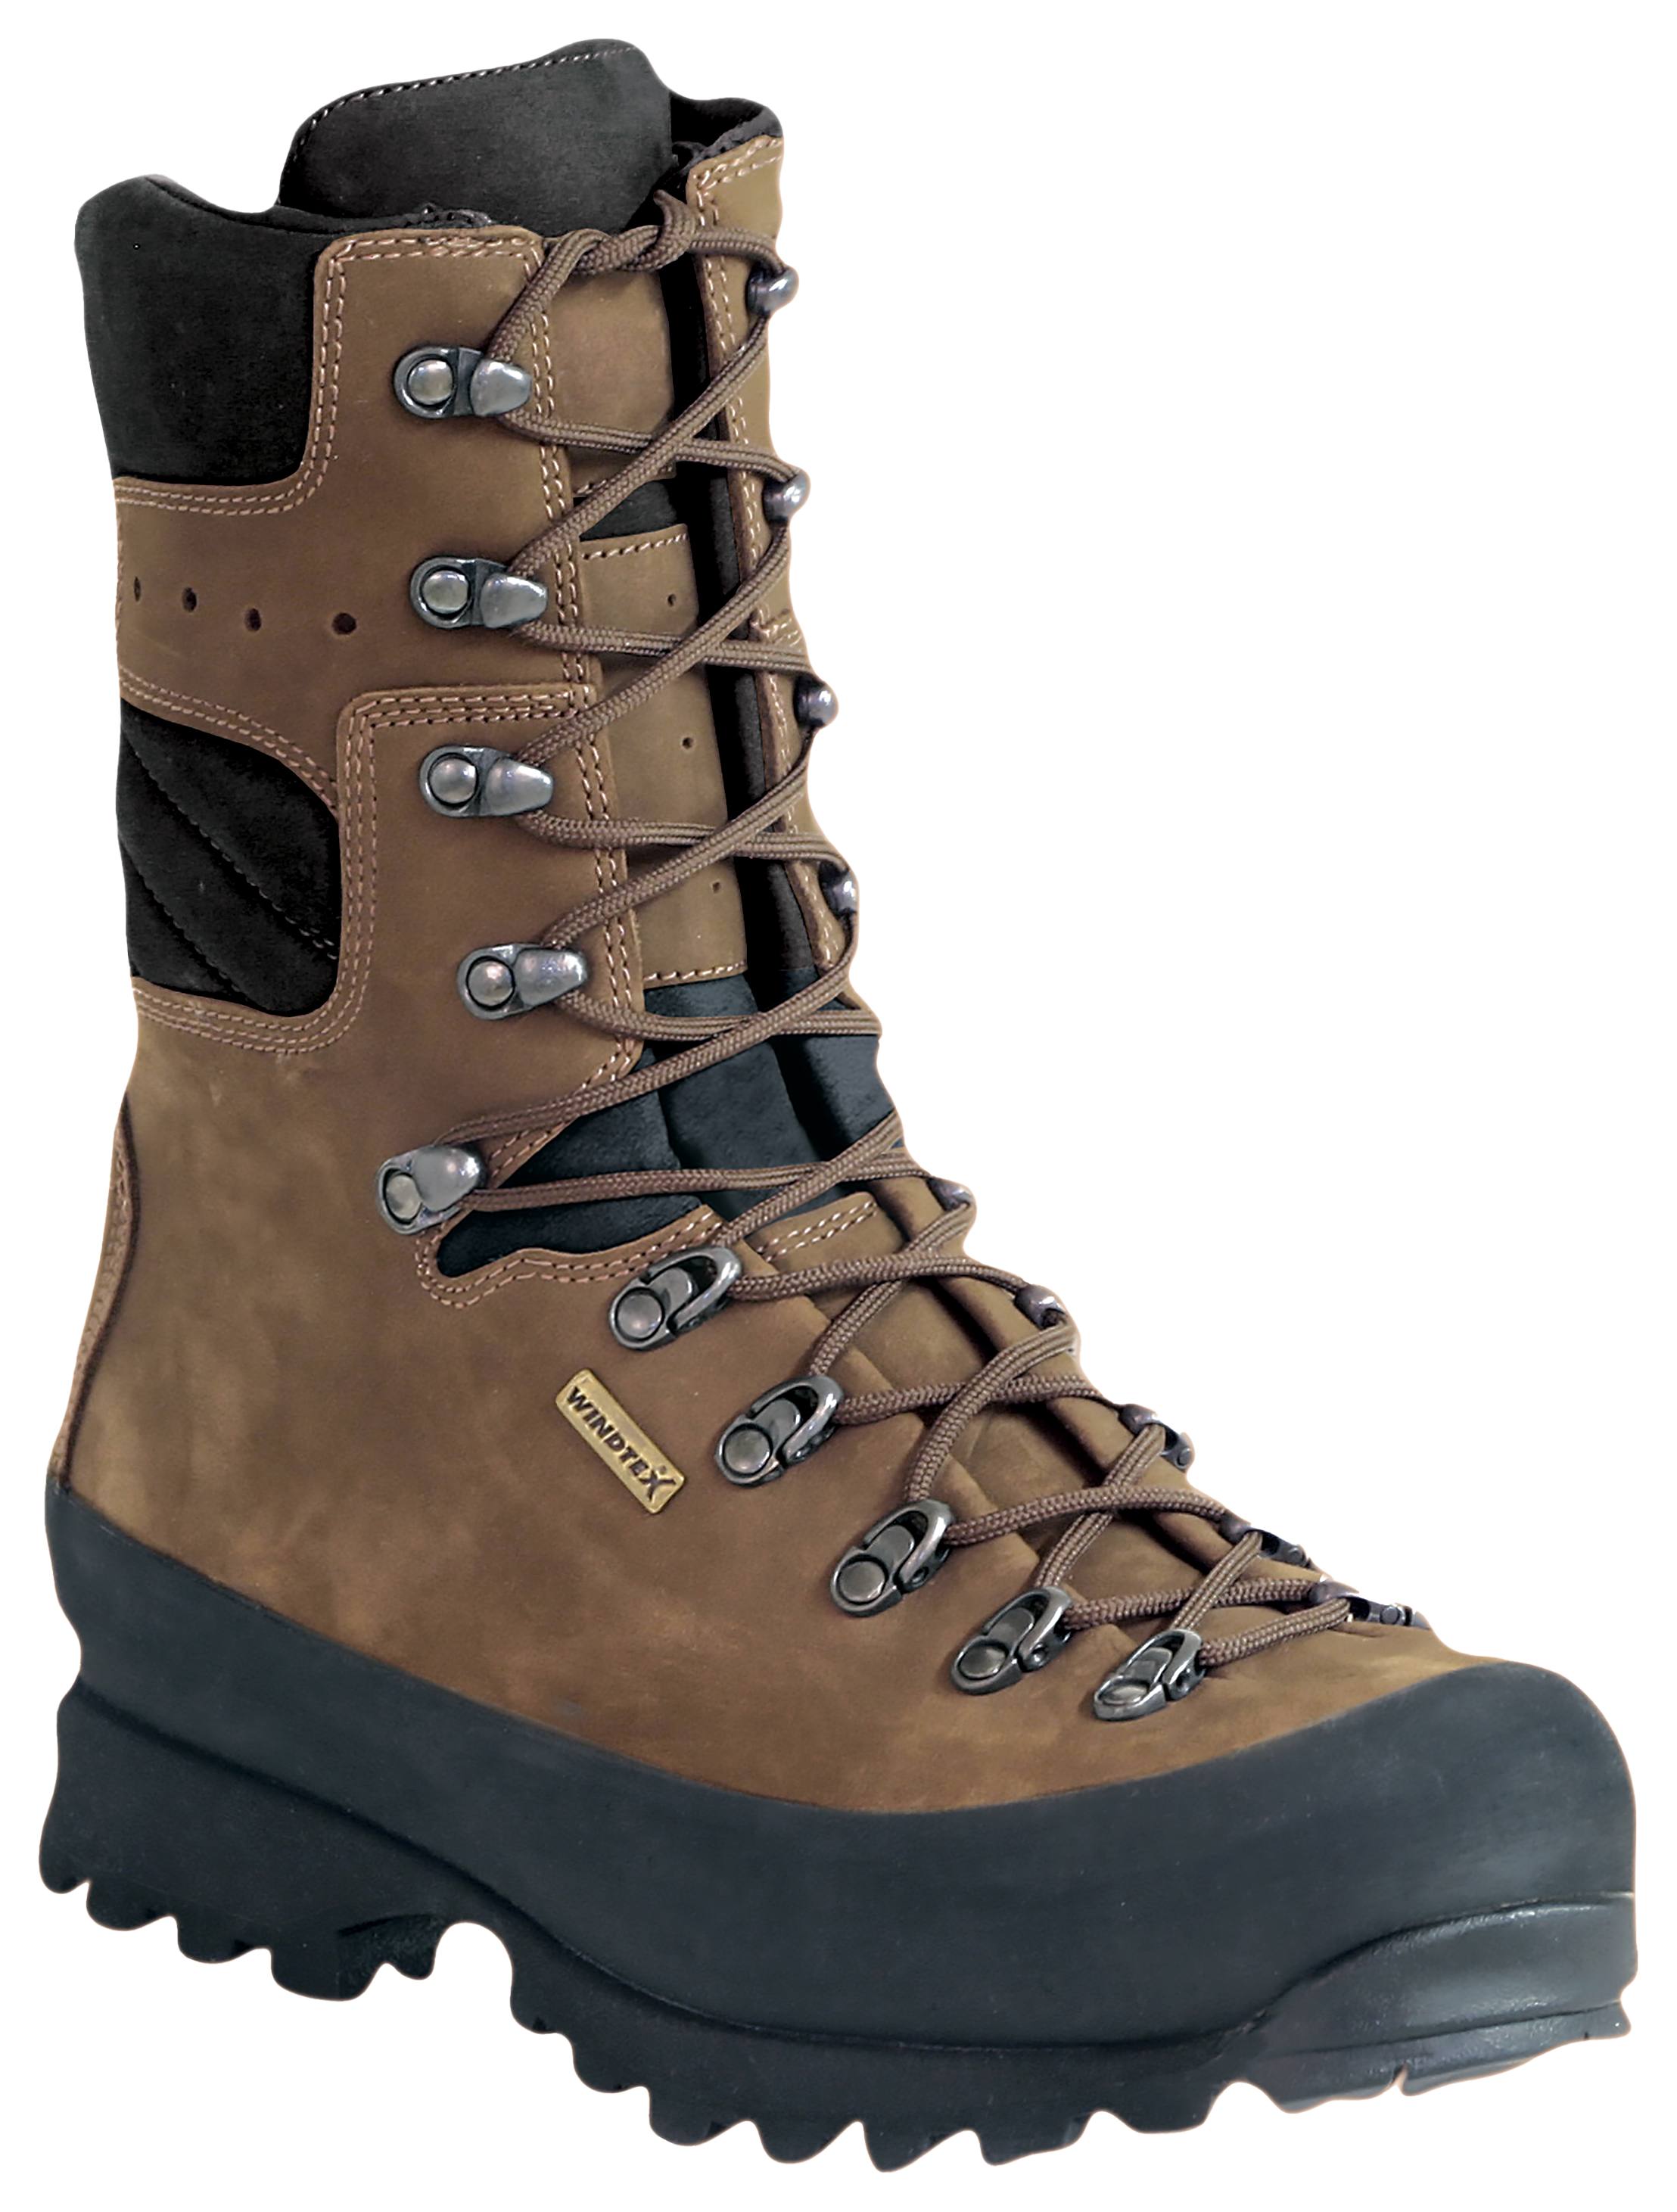 Kenetrek Mountain Extreme 1000 Insulated Waterproof Hunting Boots for Men - Brown - 10 5M